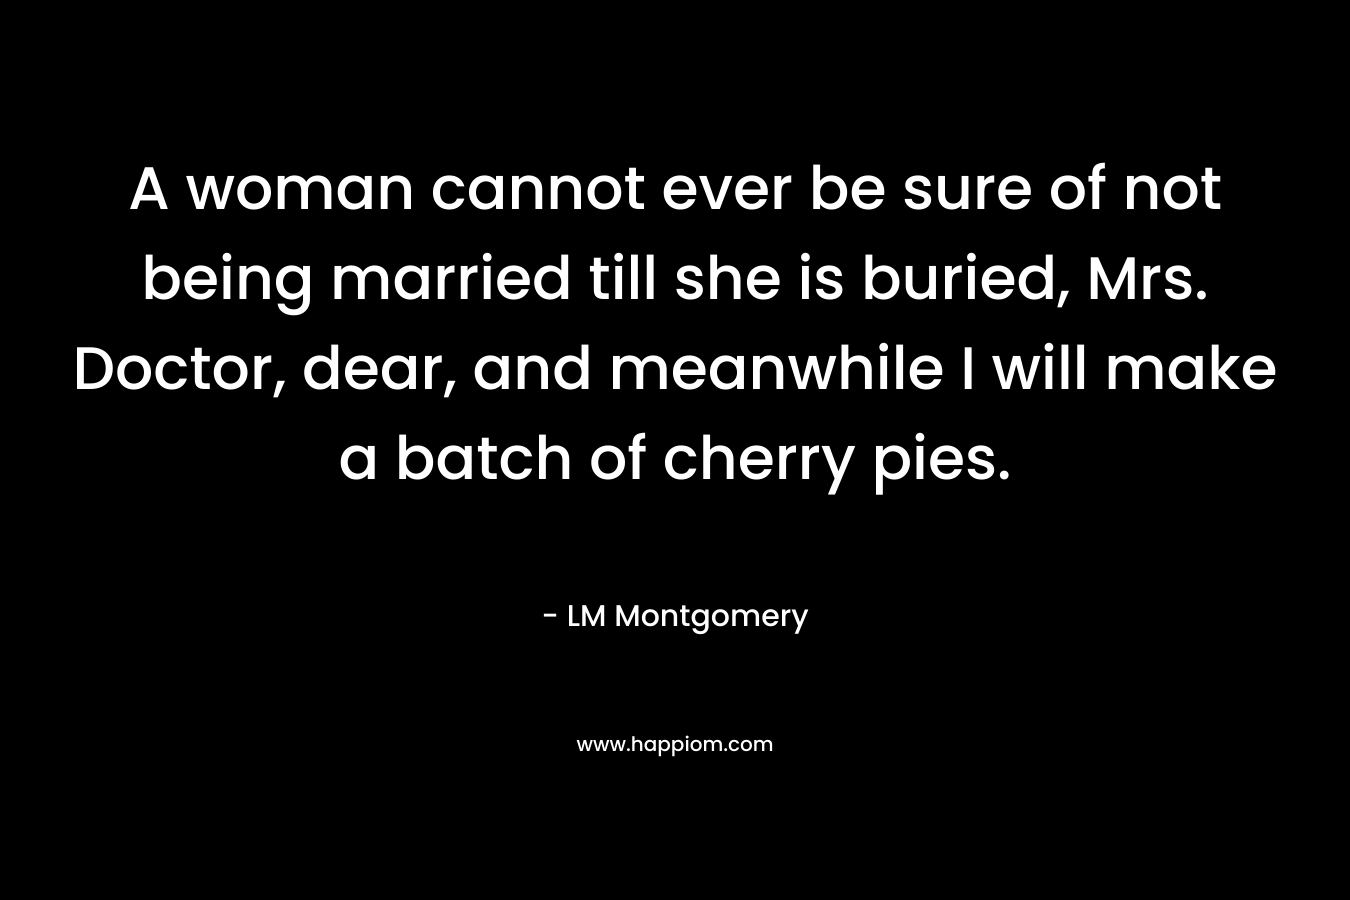 A woman cannot ever be sure of not being married till she is buried, Mrs. Doctor, dear, and meanwhile I will make a batch of cherry pies. – LM Montgomery